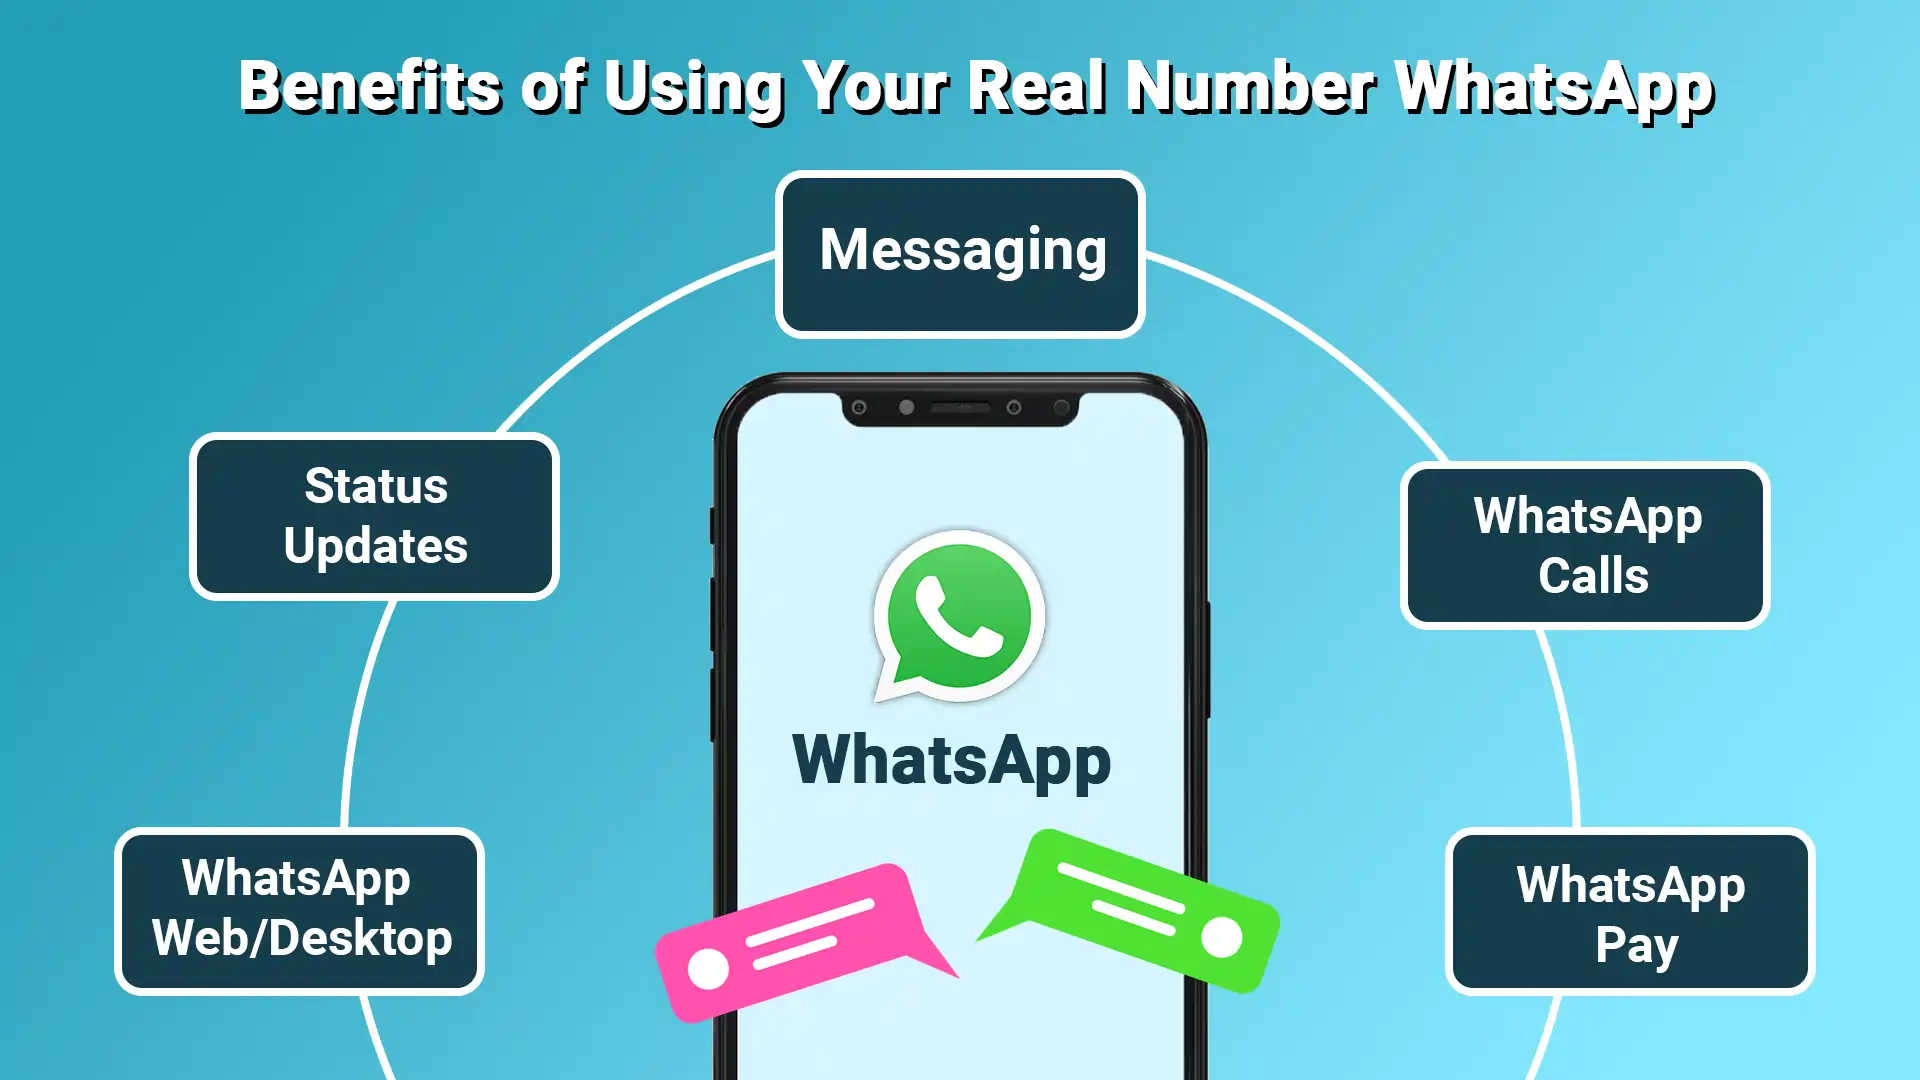 Benefits of Using Your Real Number WhatsApp